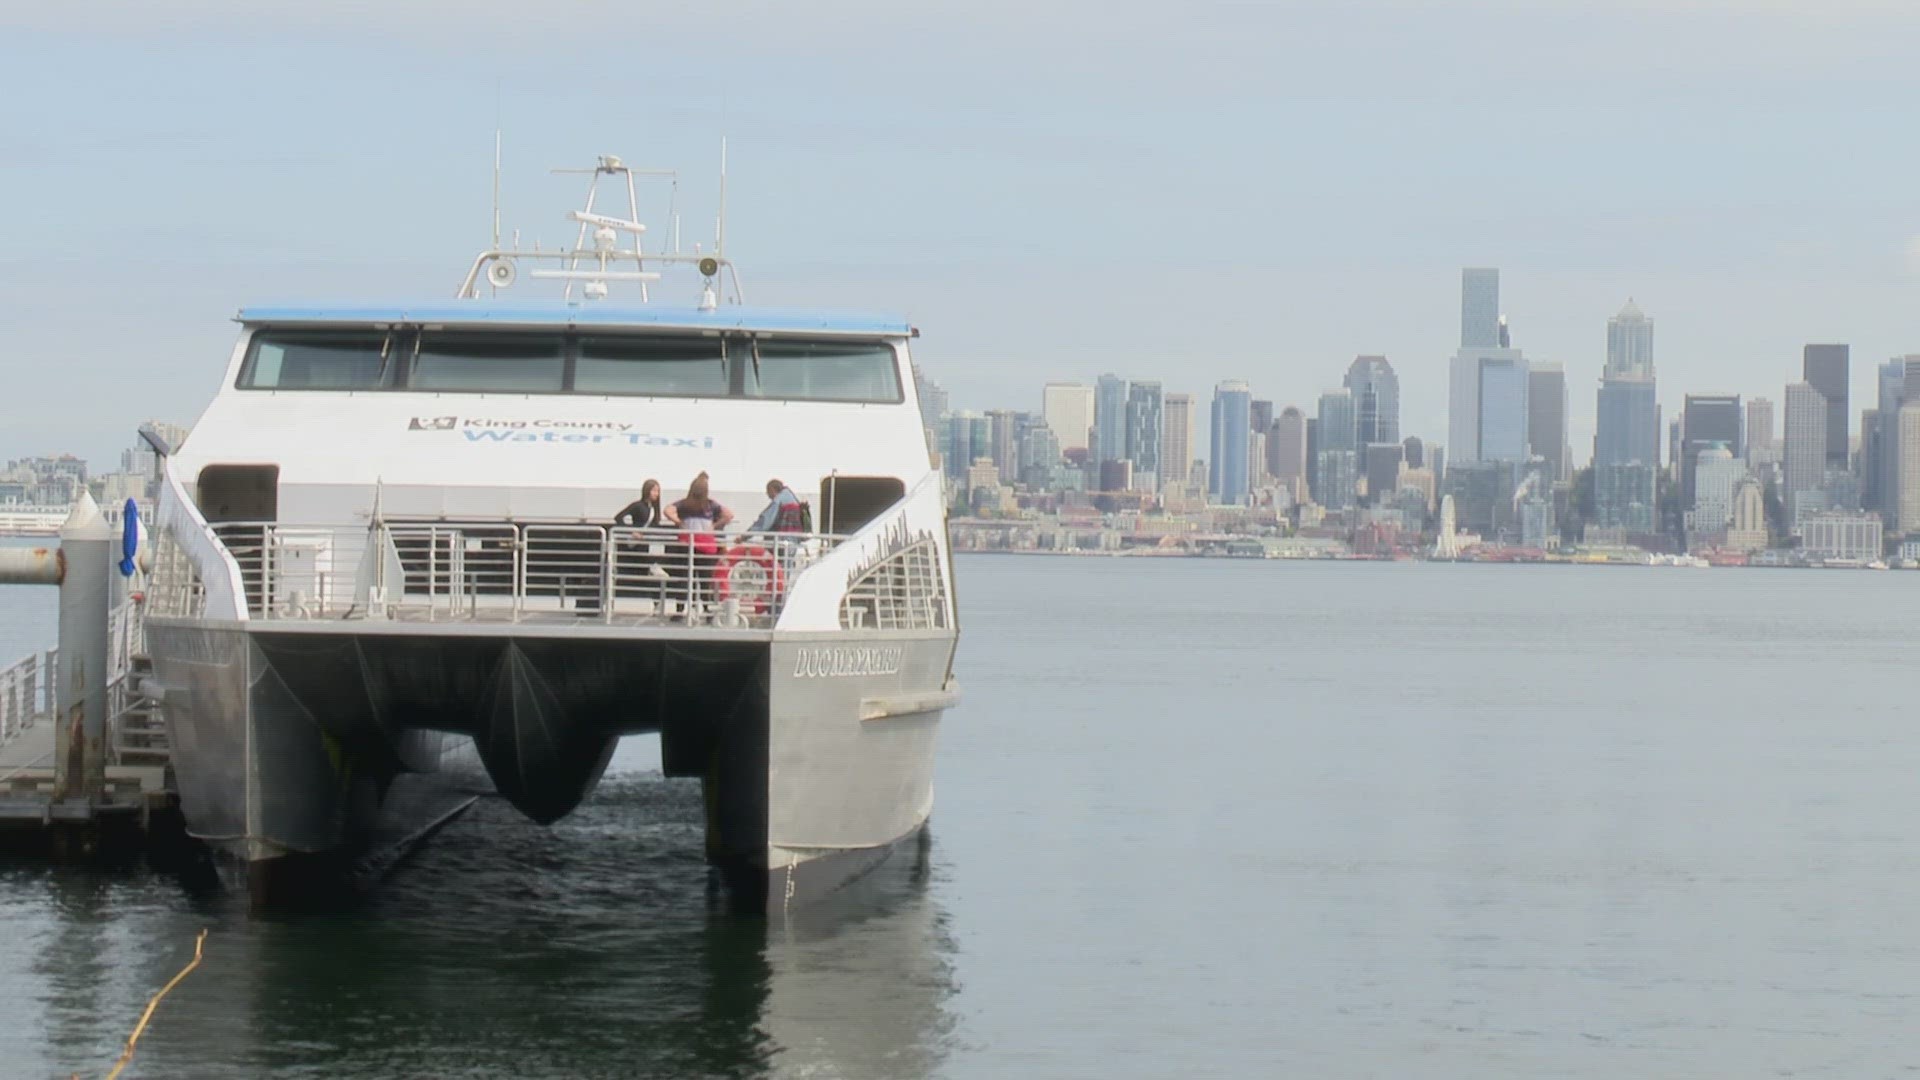 The water taxi typically ramps down mid-day service in the fall and winter, but ridership levels warrant the extra sailings throughout the year, King County said.